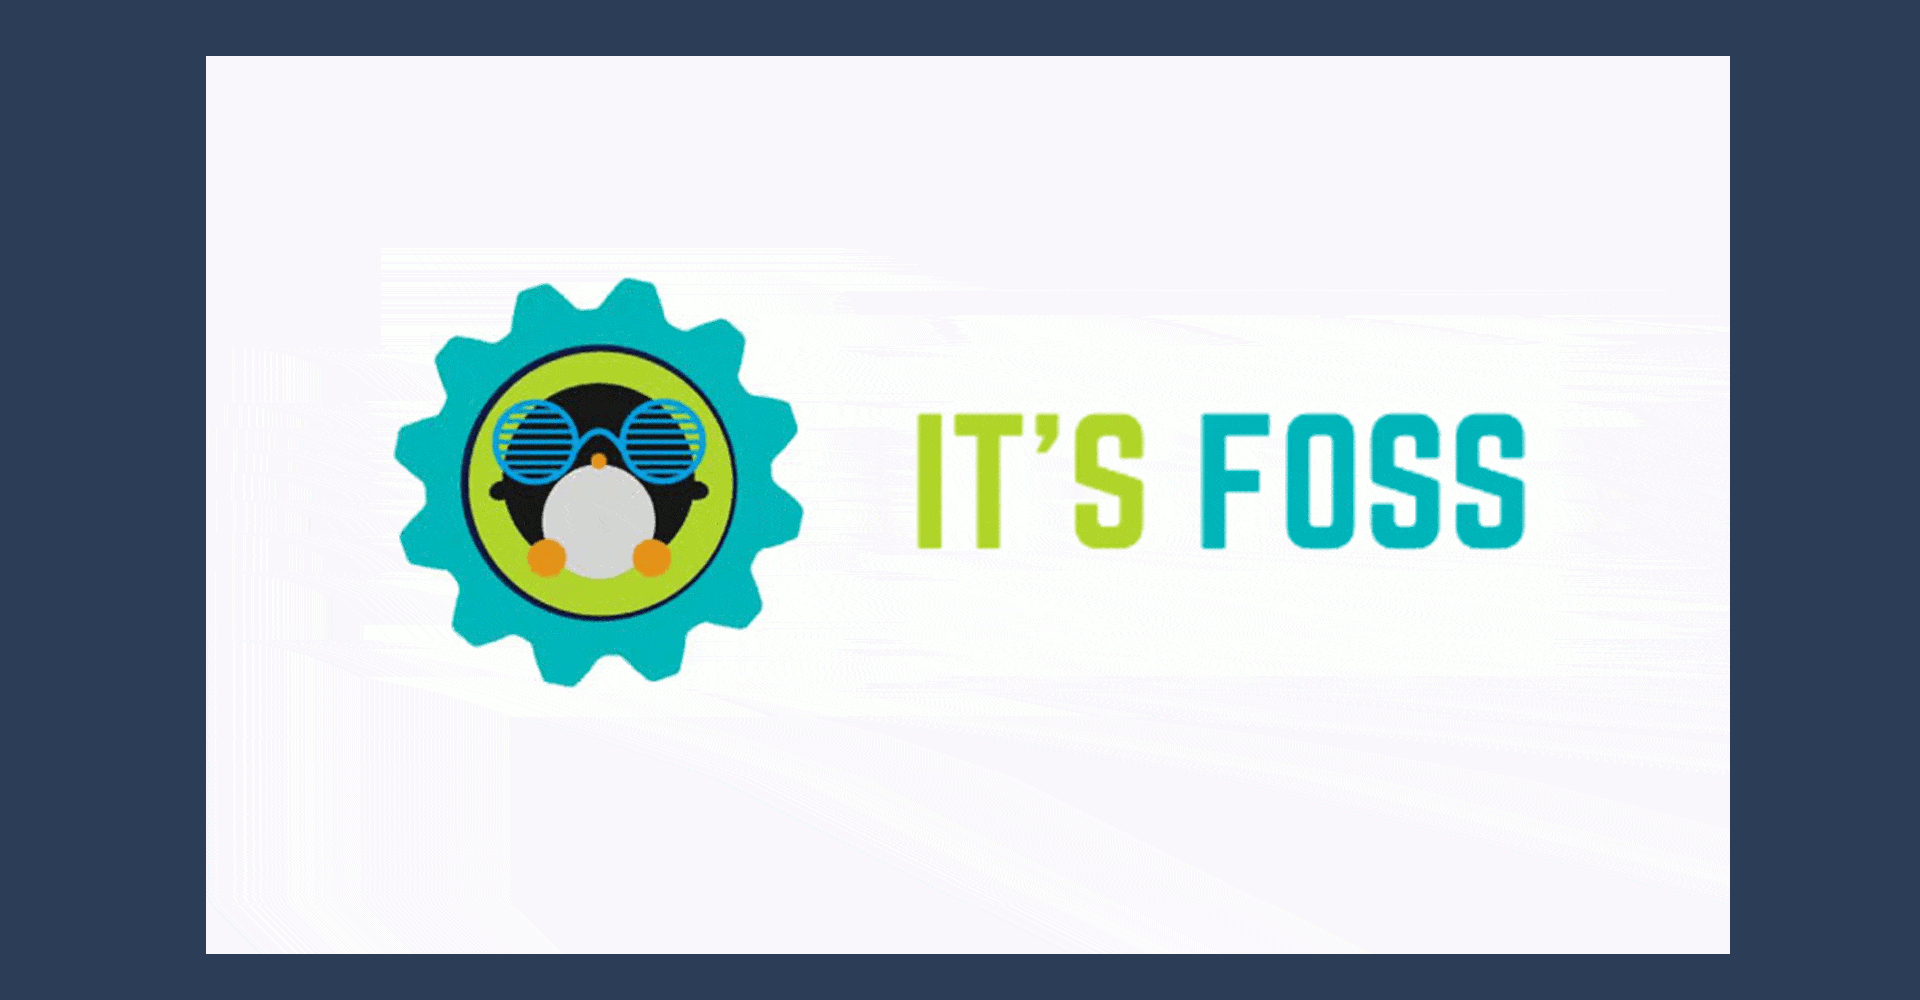 It's FOSS gif created in GIMP